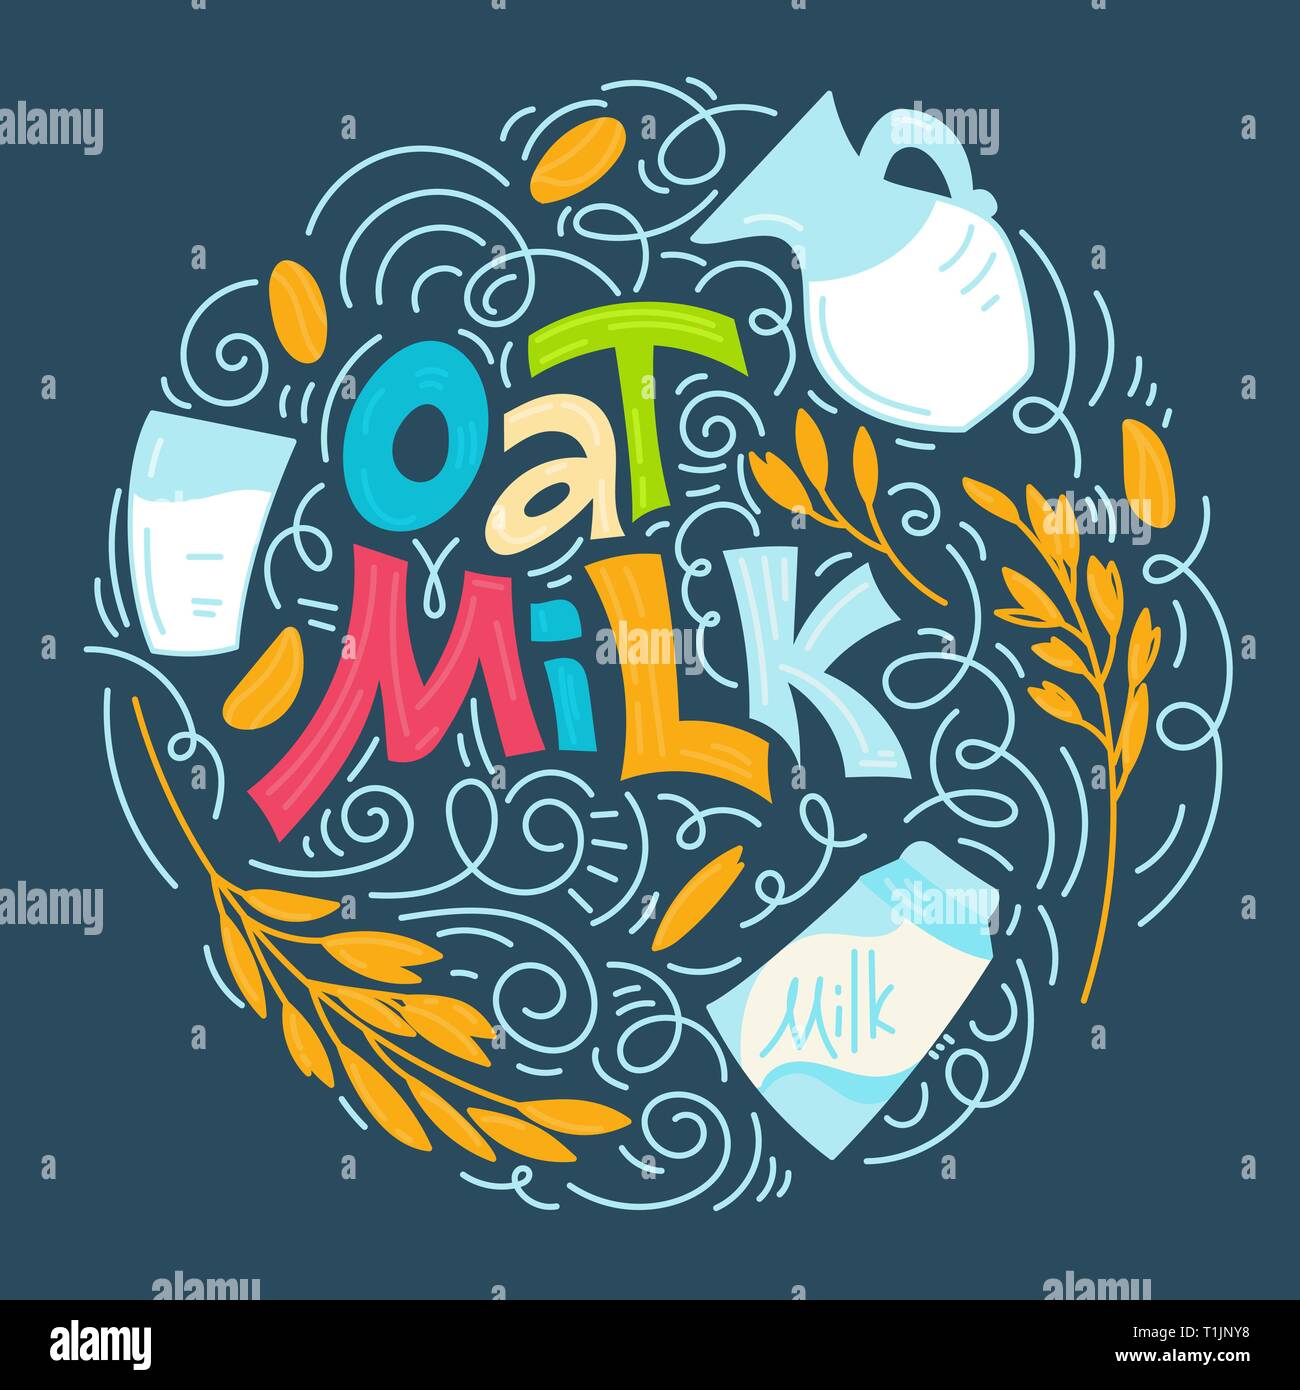 Oat milk hand drawn lettering. Spikes and grains of oats, glass with oat milk, carton box and glass jar of milk. Stock Vector